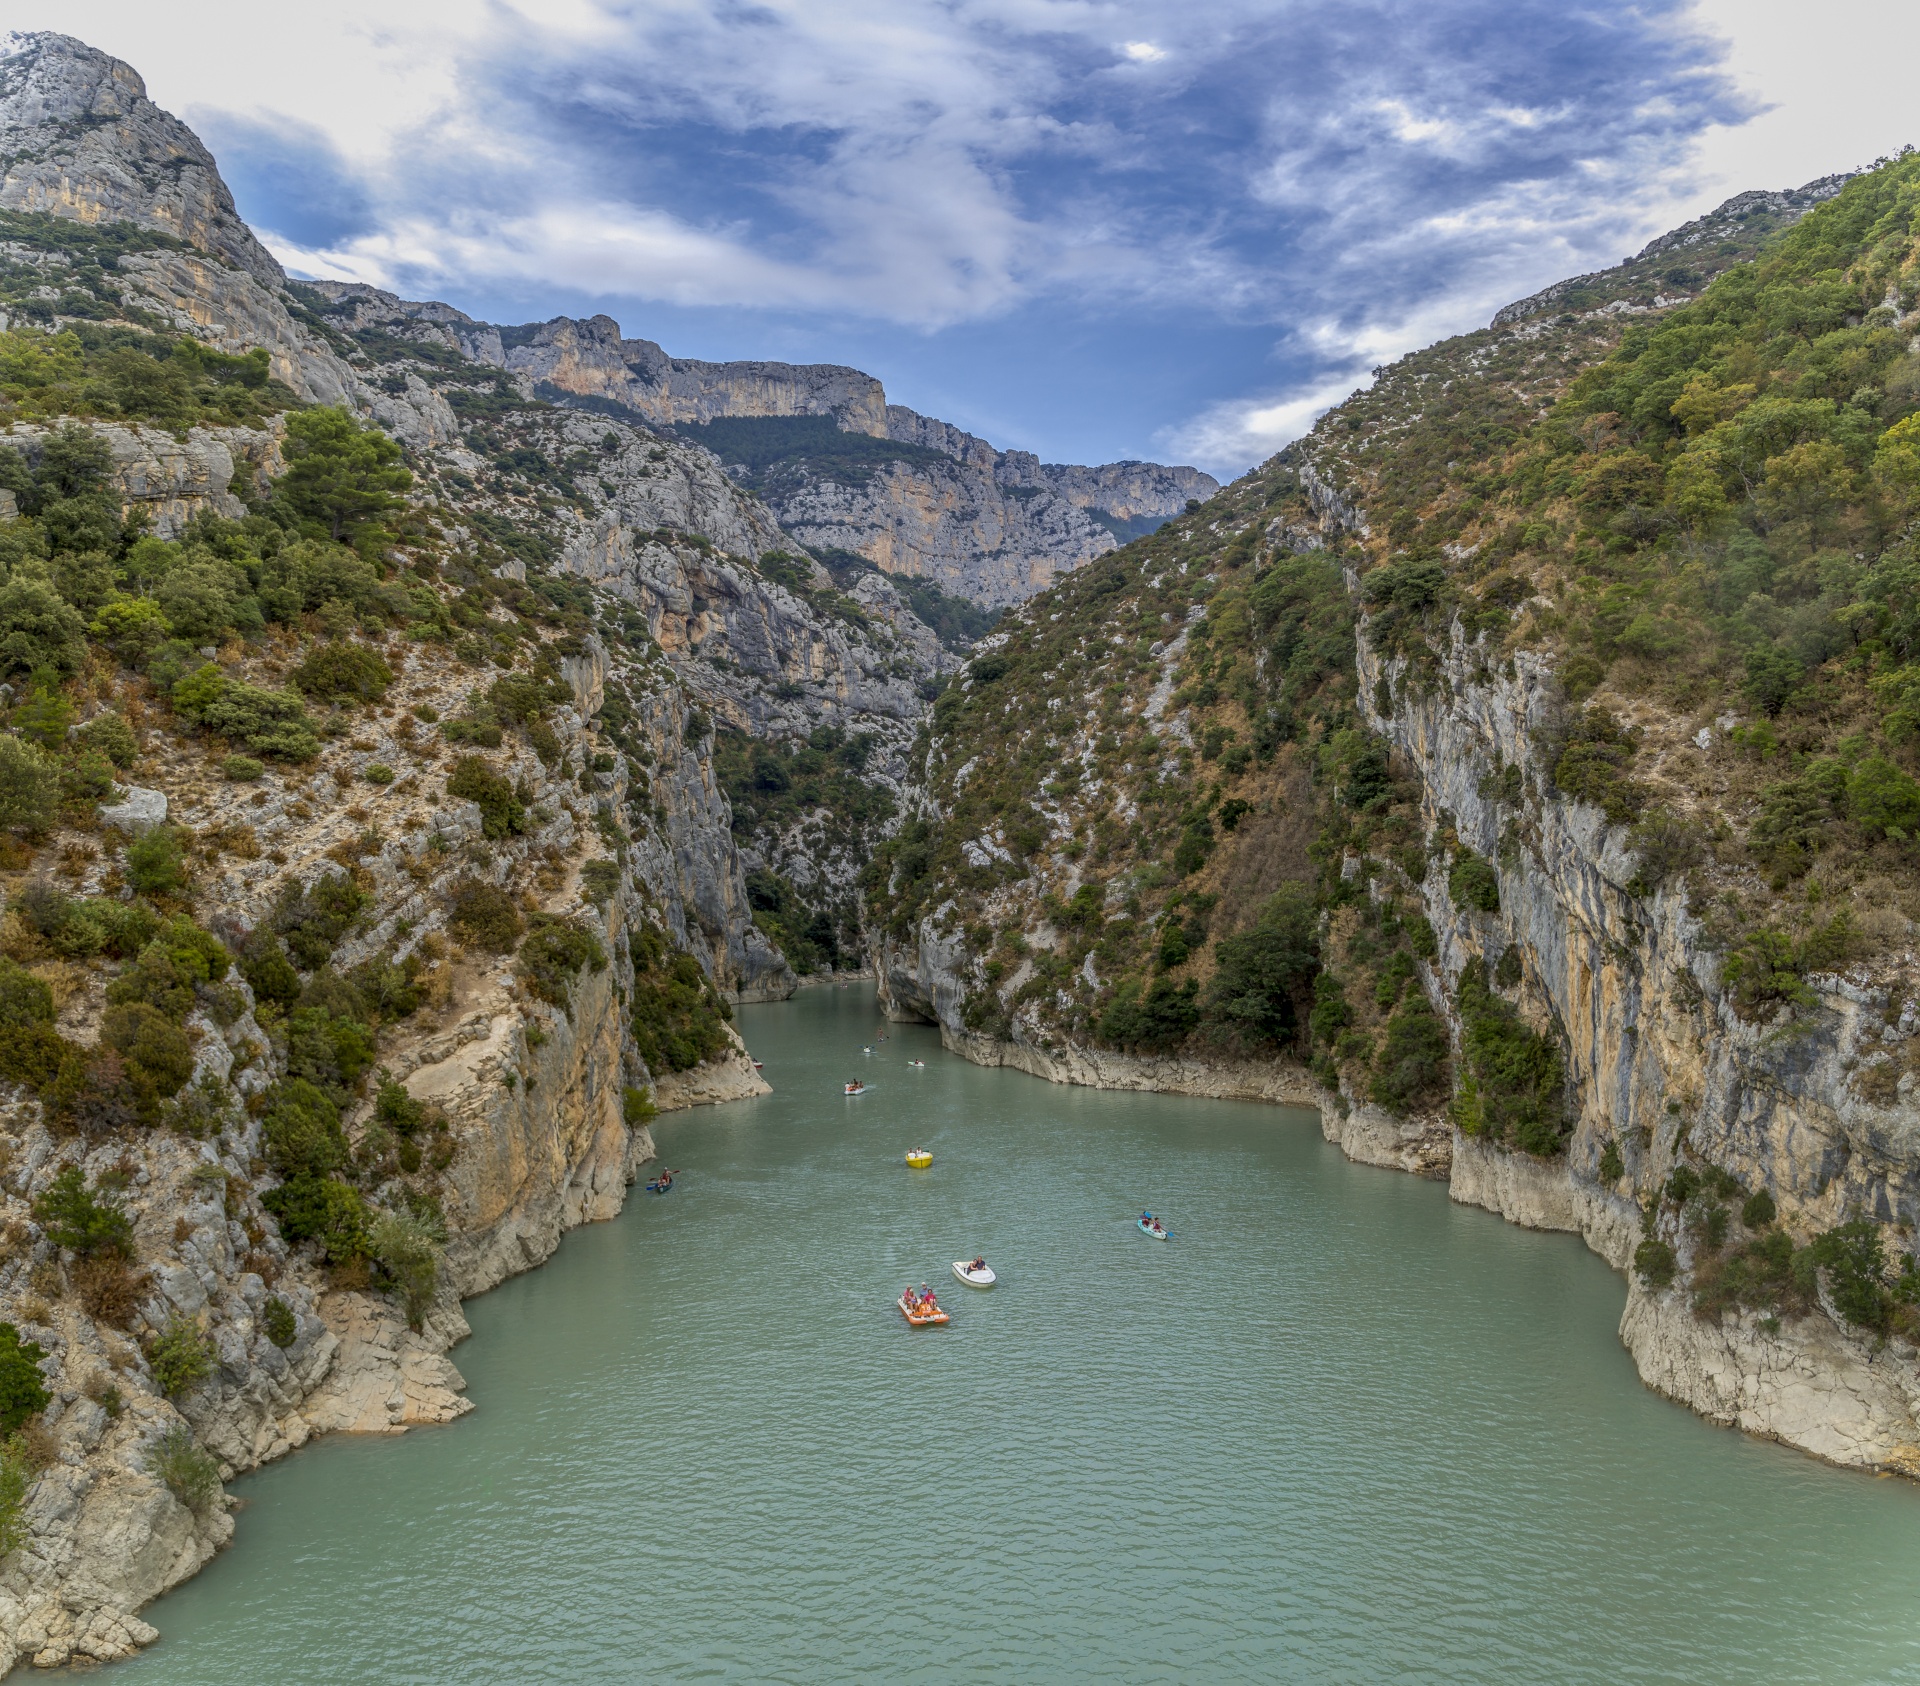 Verdon, France on Vacation - Tourists enjoying a warm summer day in the Gorges du Verdon, renting boats to explore the gorges or feeling adventurous and even going for a swim.